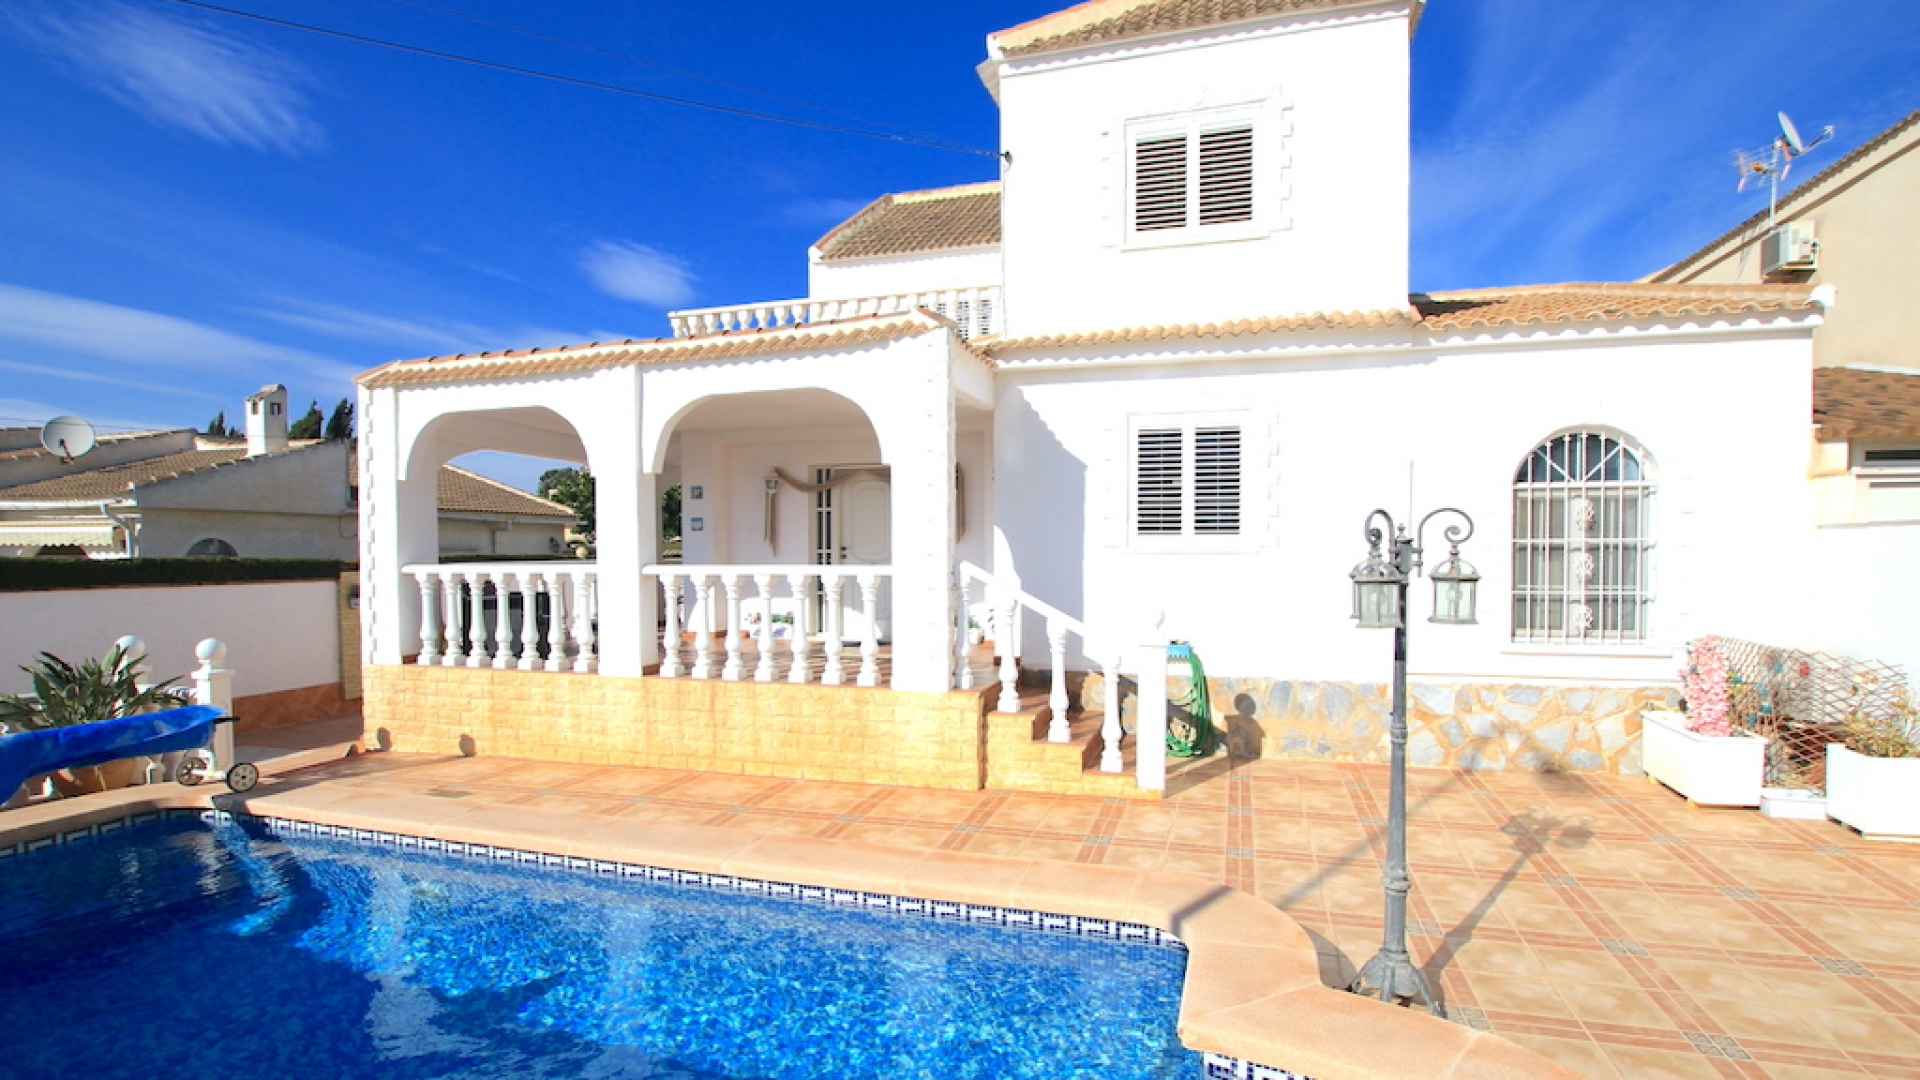 48358_expansive_4_bed_detached_villa_with_private_pool_and_garage_220224130515_img_7441